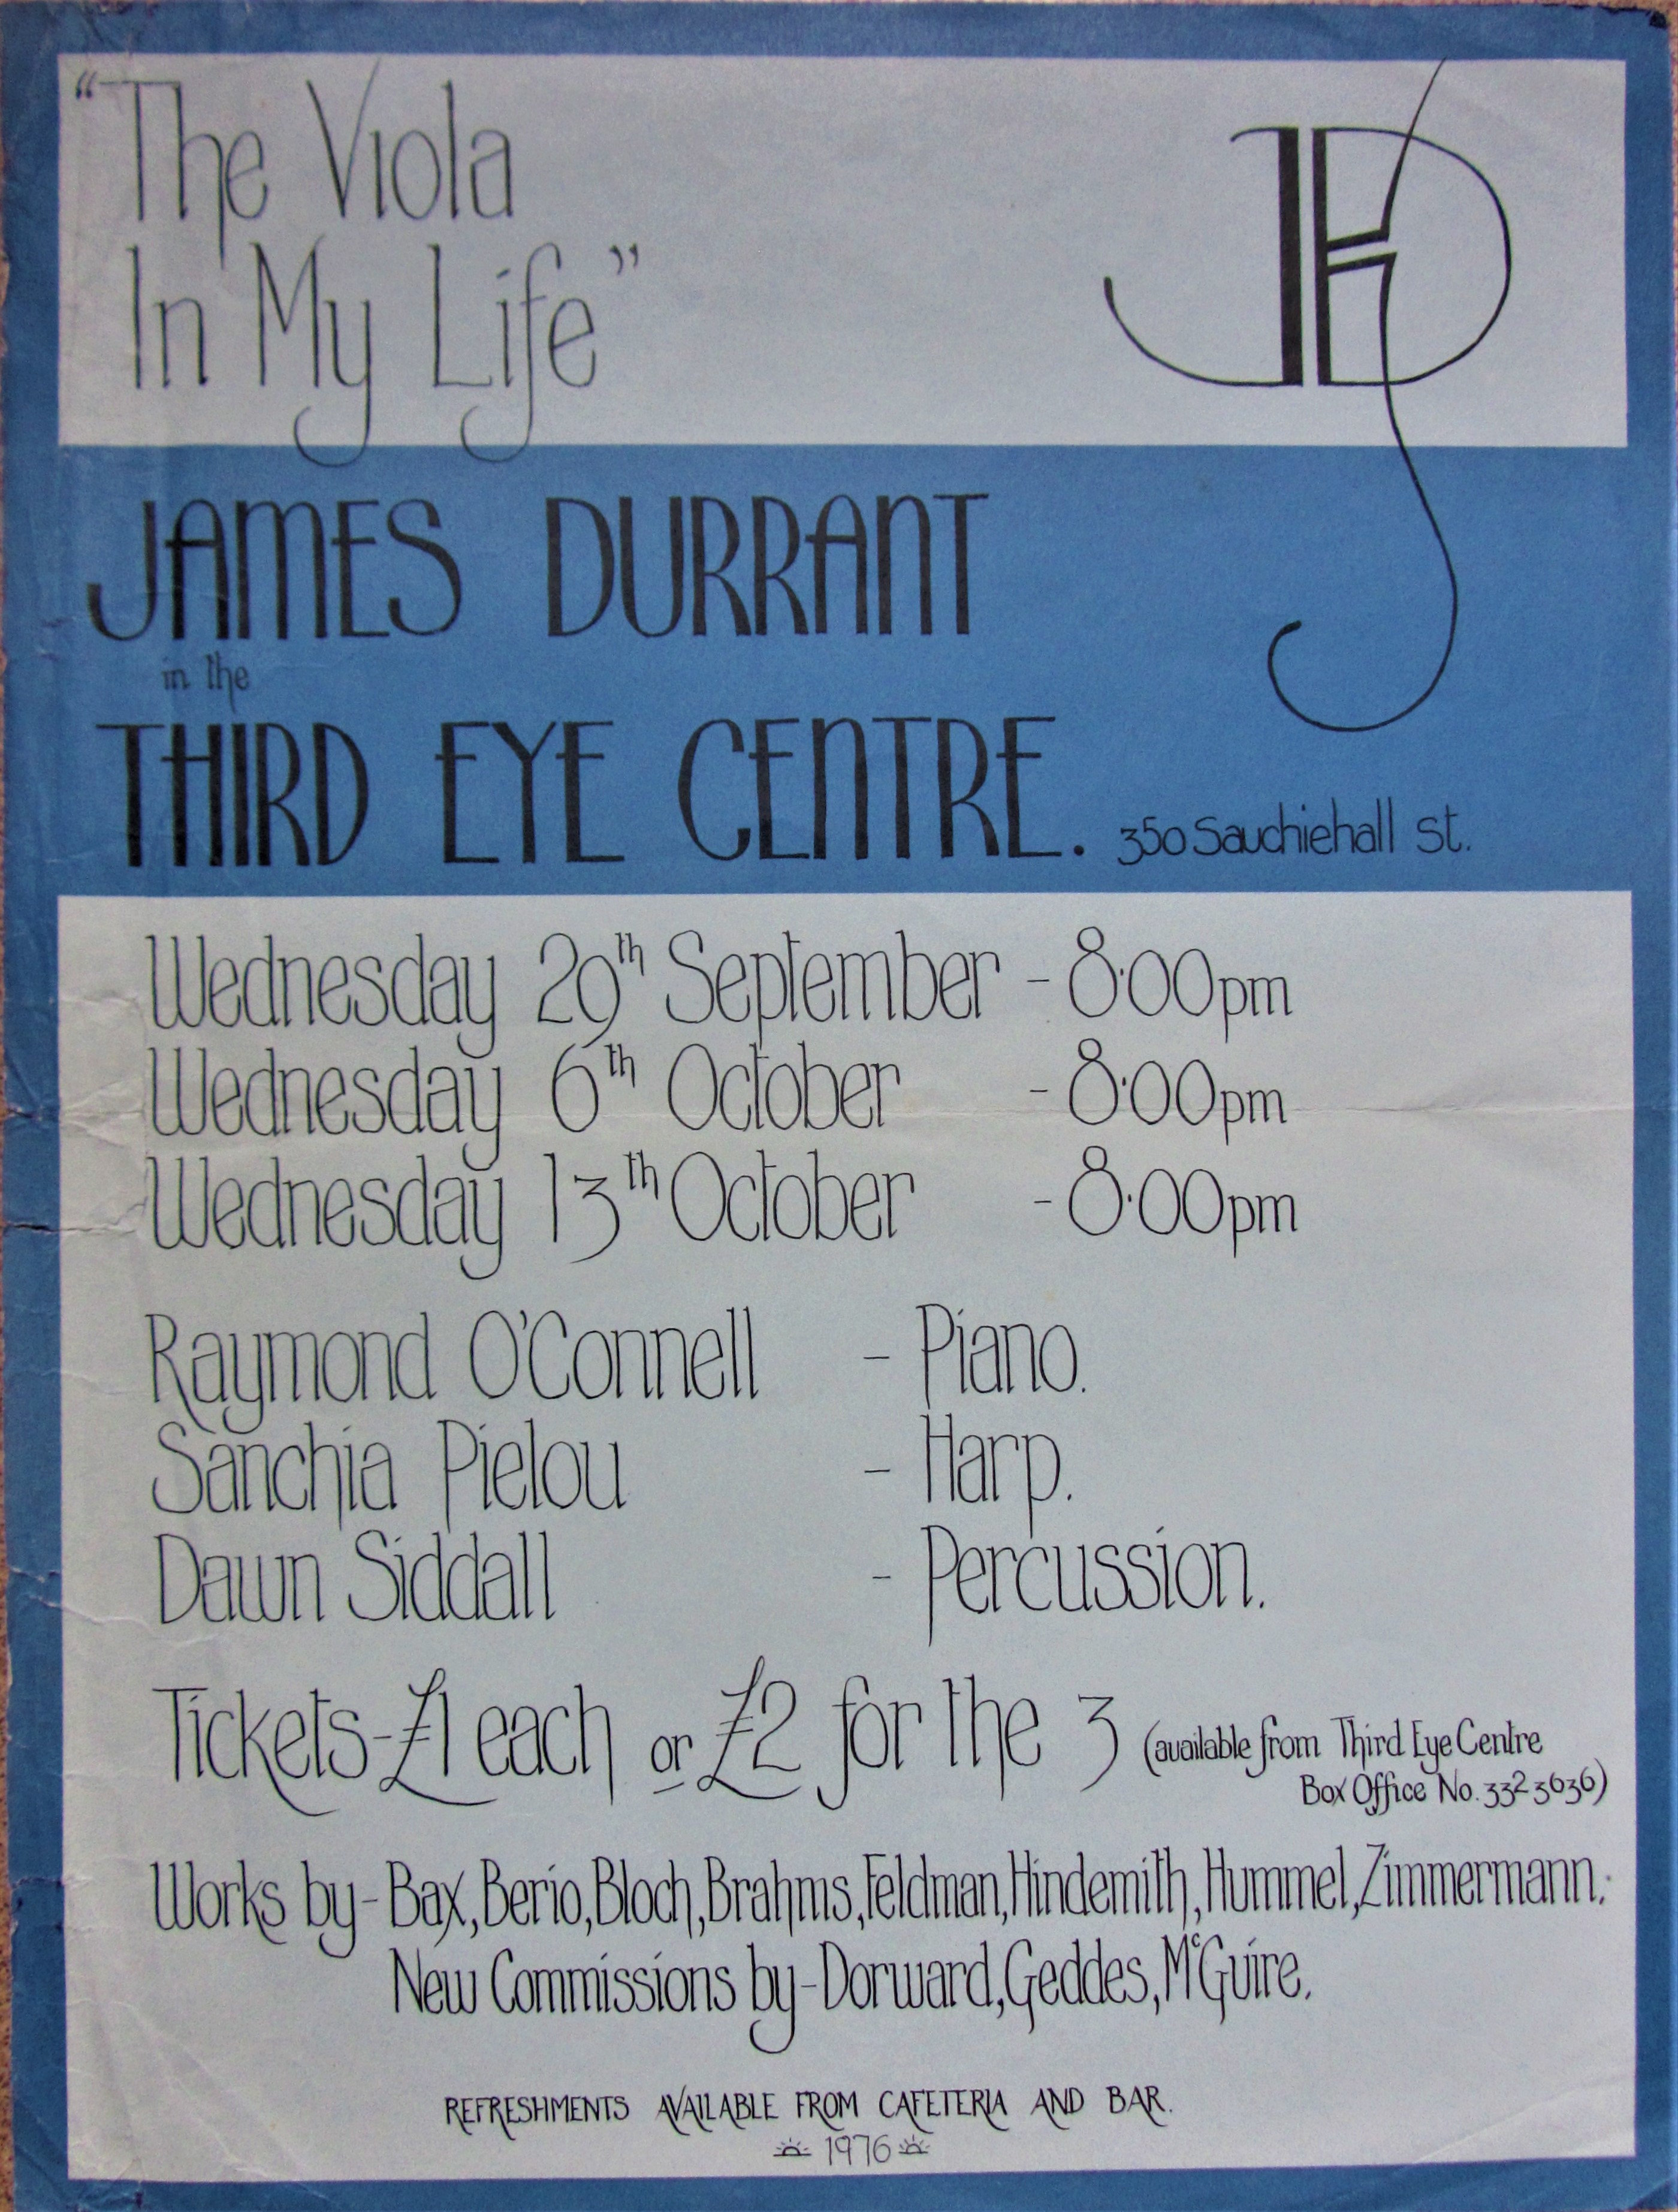 James Durrant commissioned much viola music , played in series such as this one in 1976